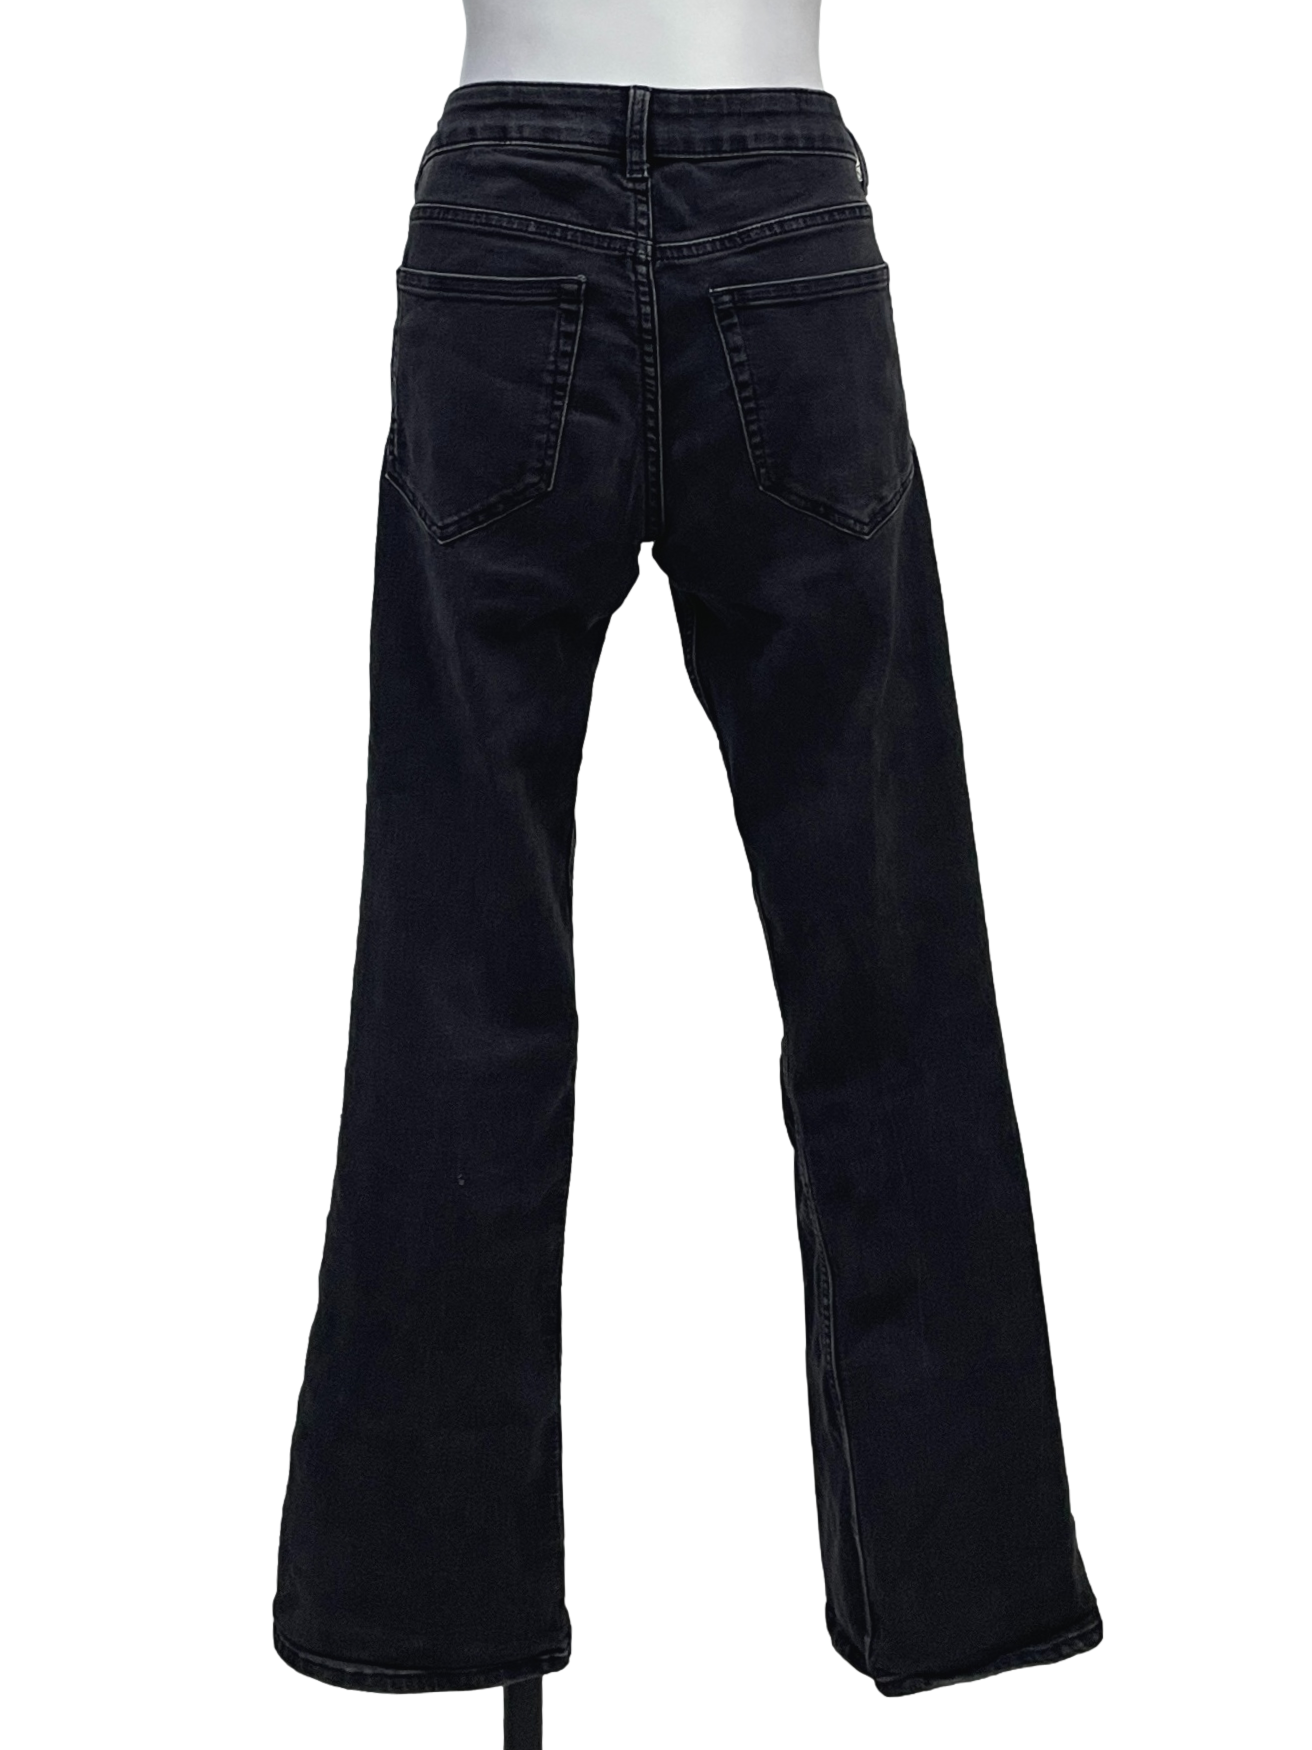 Charcoal Black Low-Rise Bootcut Jeans